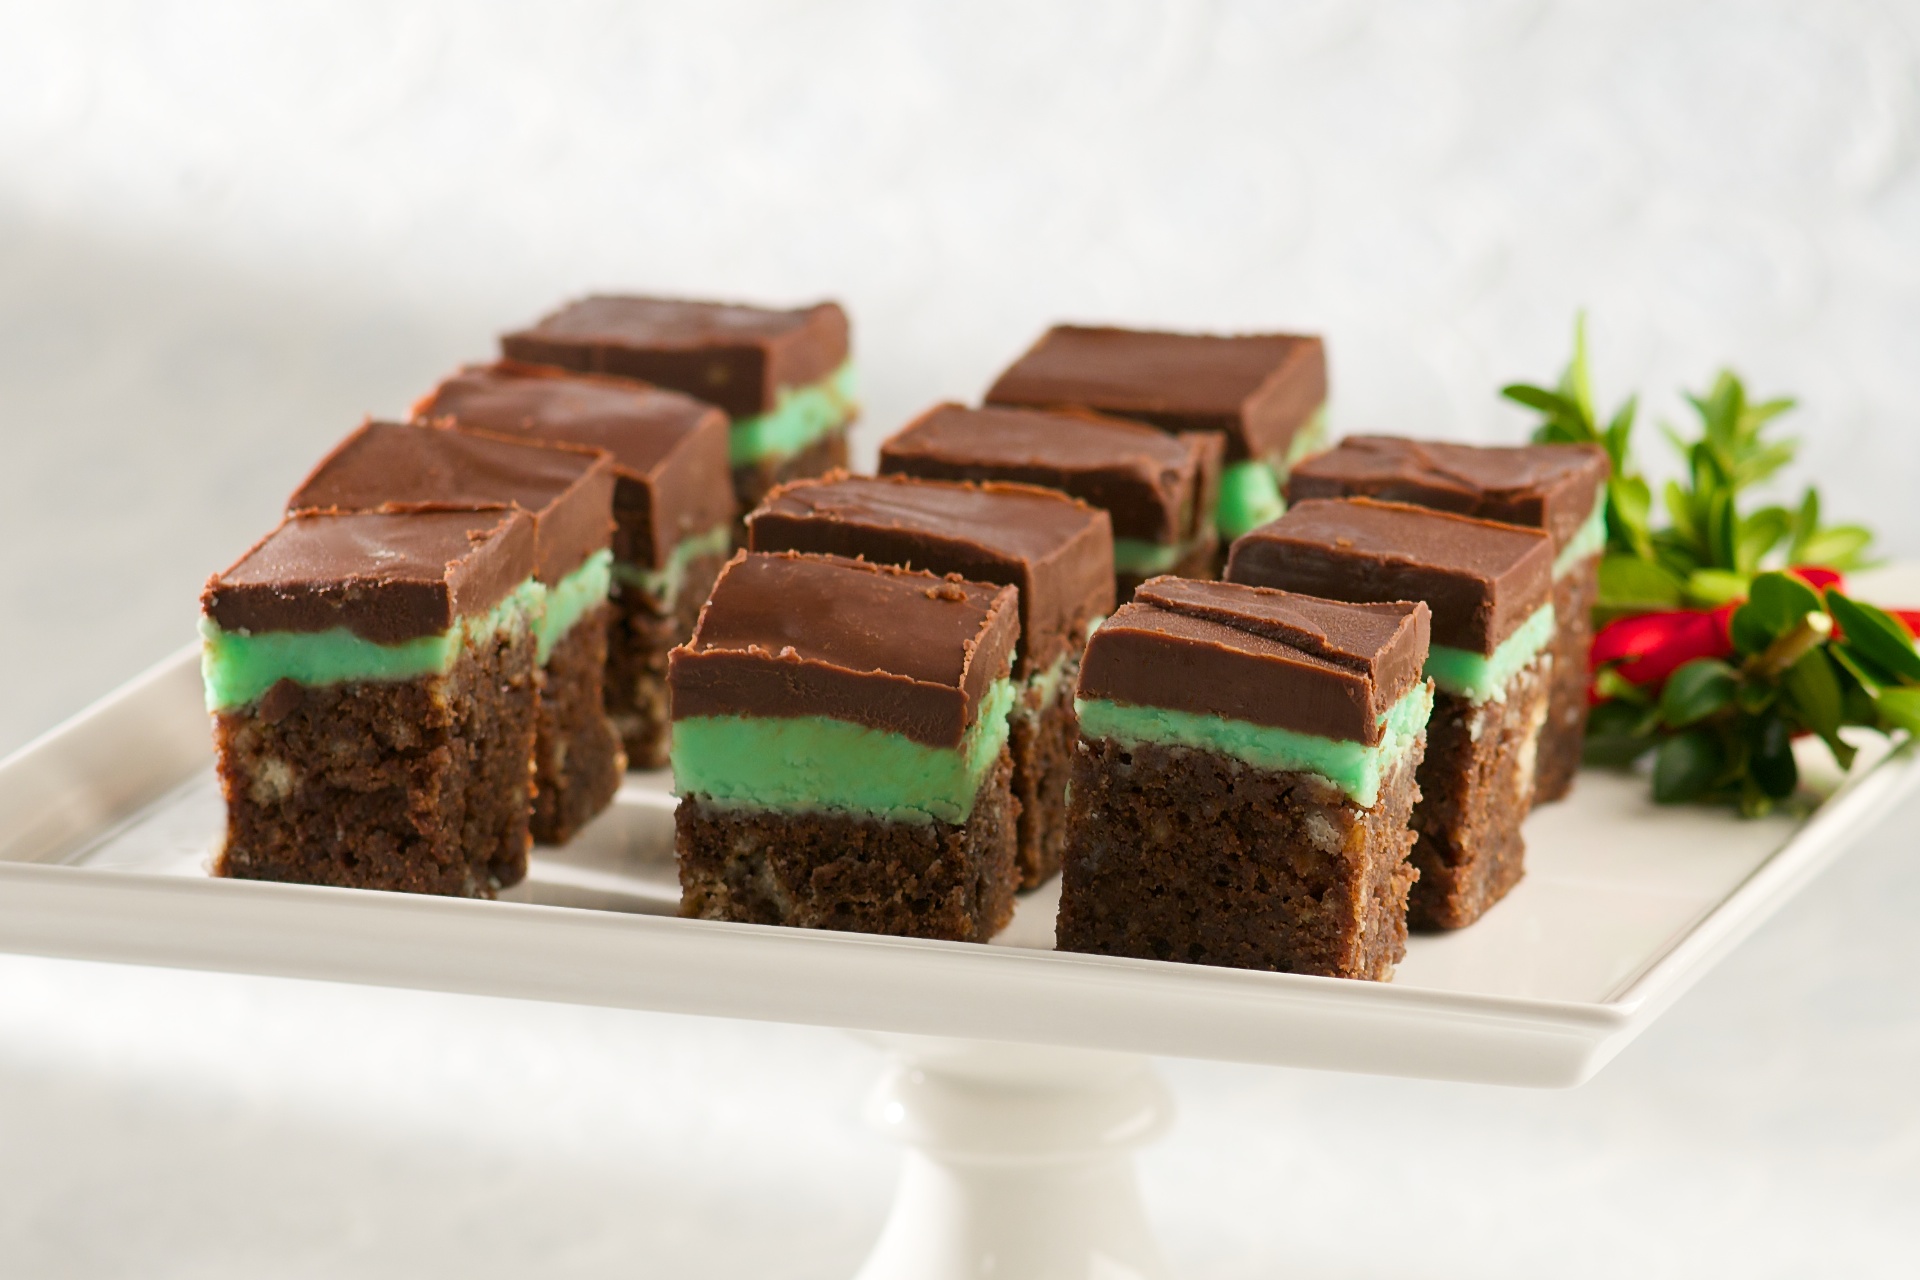 These bars are great at the holidays with their festive green mint layer. They have a cake-like first layer, then mint, then dark chocolate on top. Keep these refrigerated or frozen until about an hour before serving.